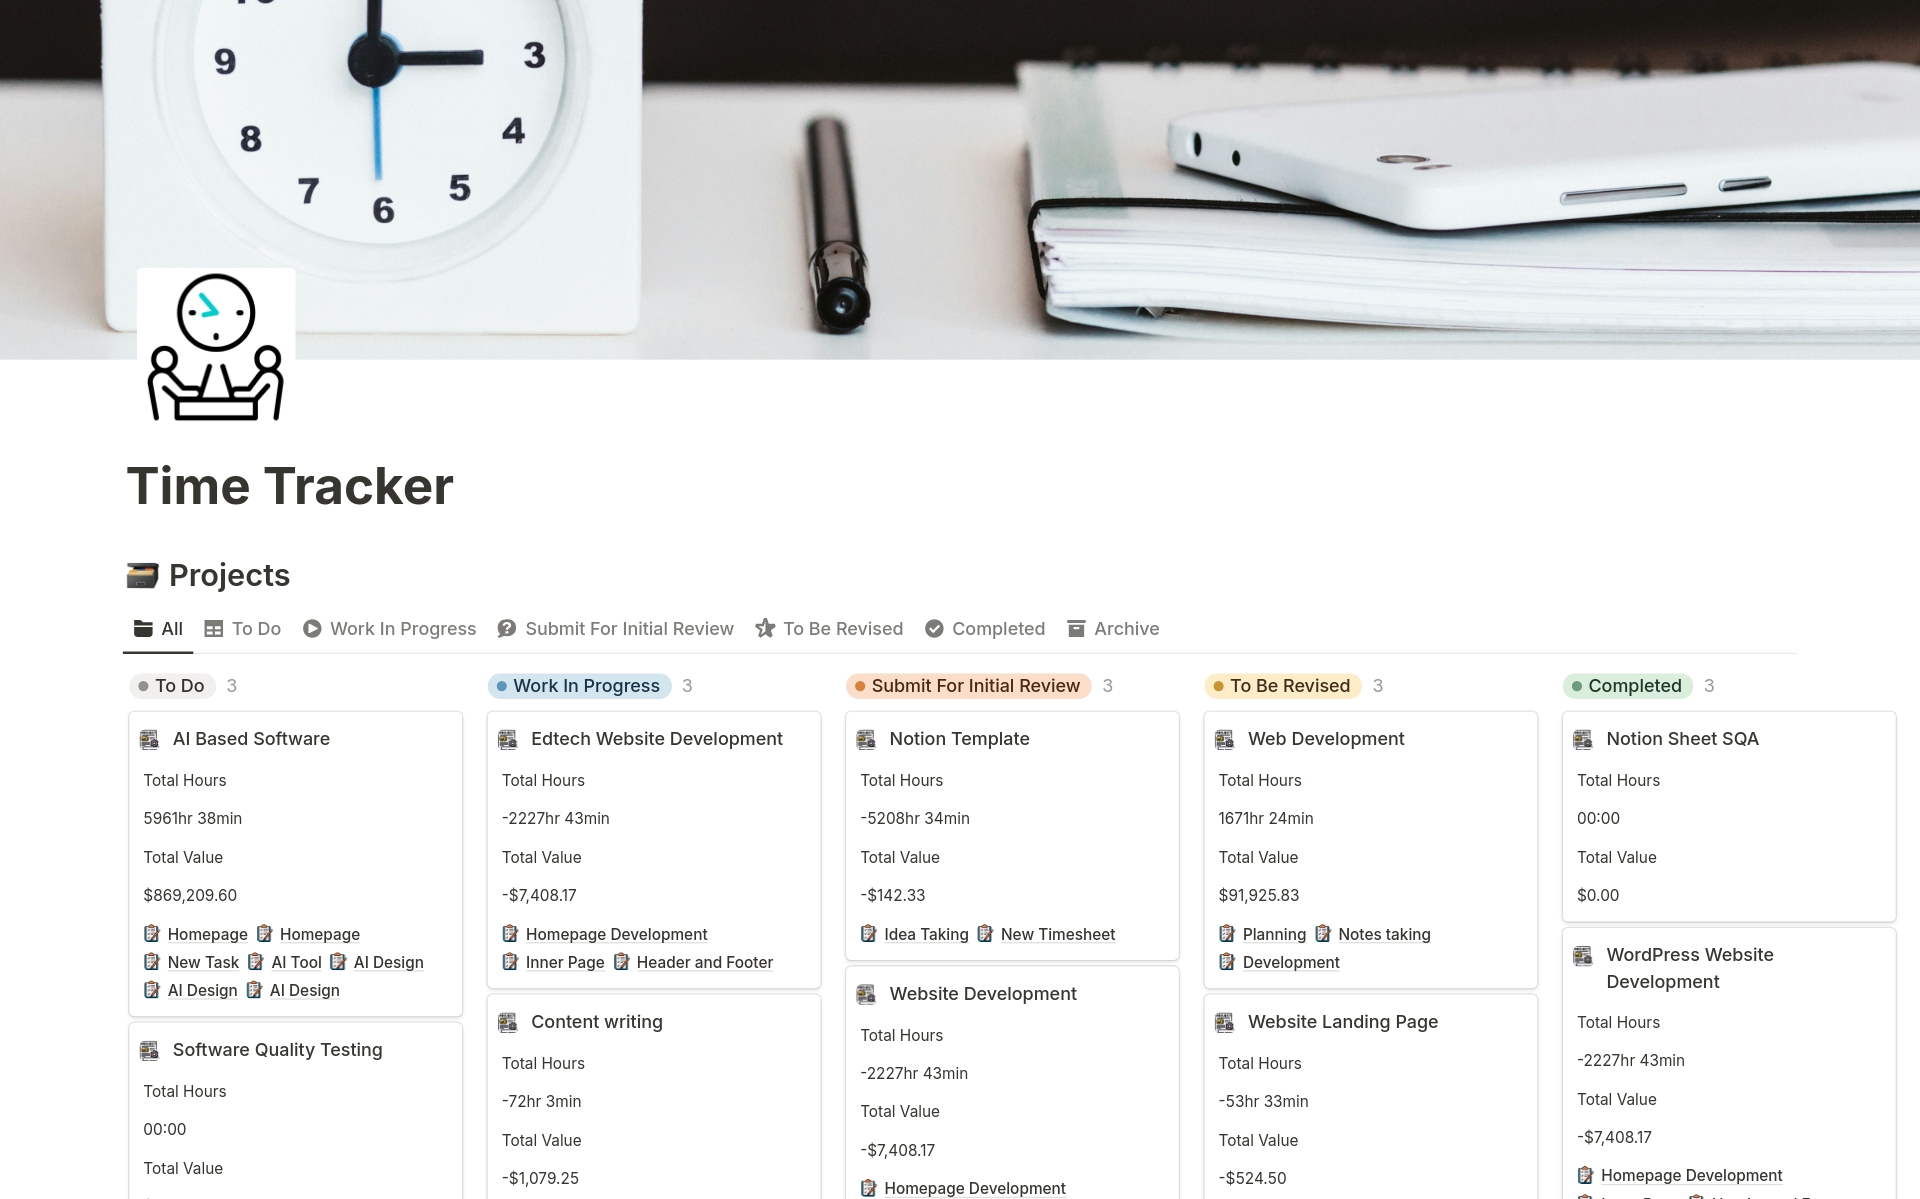 Master Your Time, Money, and Projects. Effortlessly track how long tasks take, figure out how much you'll earn per hour, and smoothly handle many projects. Boost your productivity and earnings with ease.